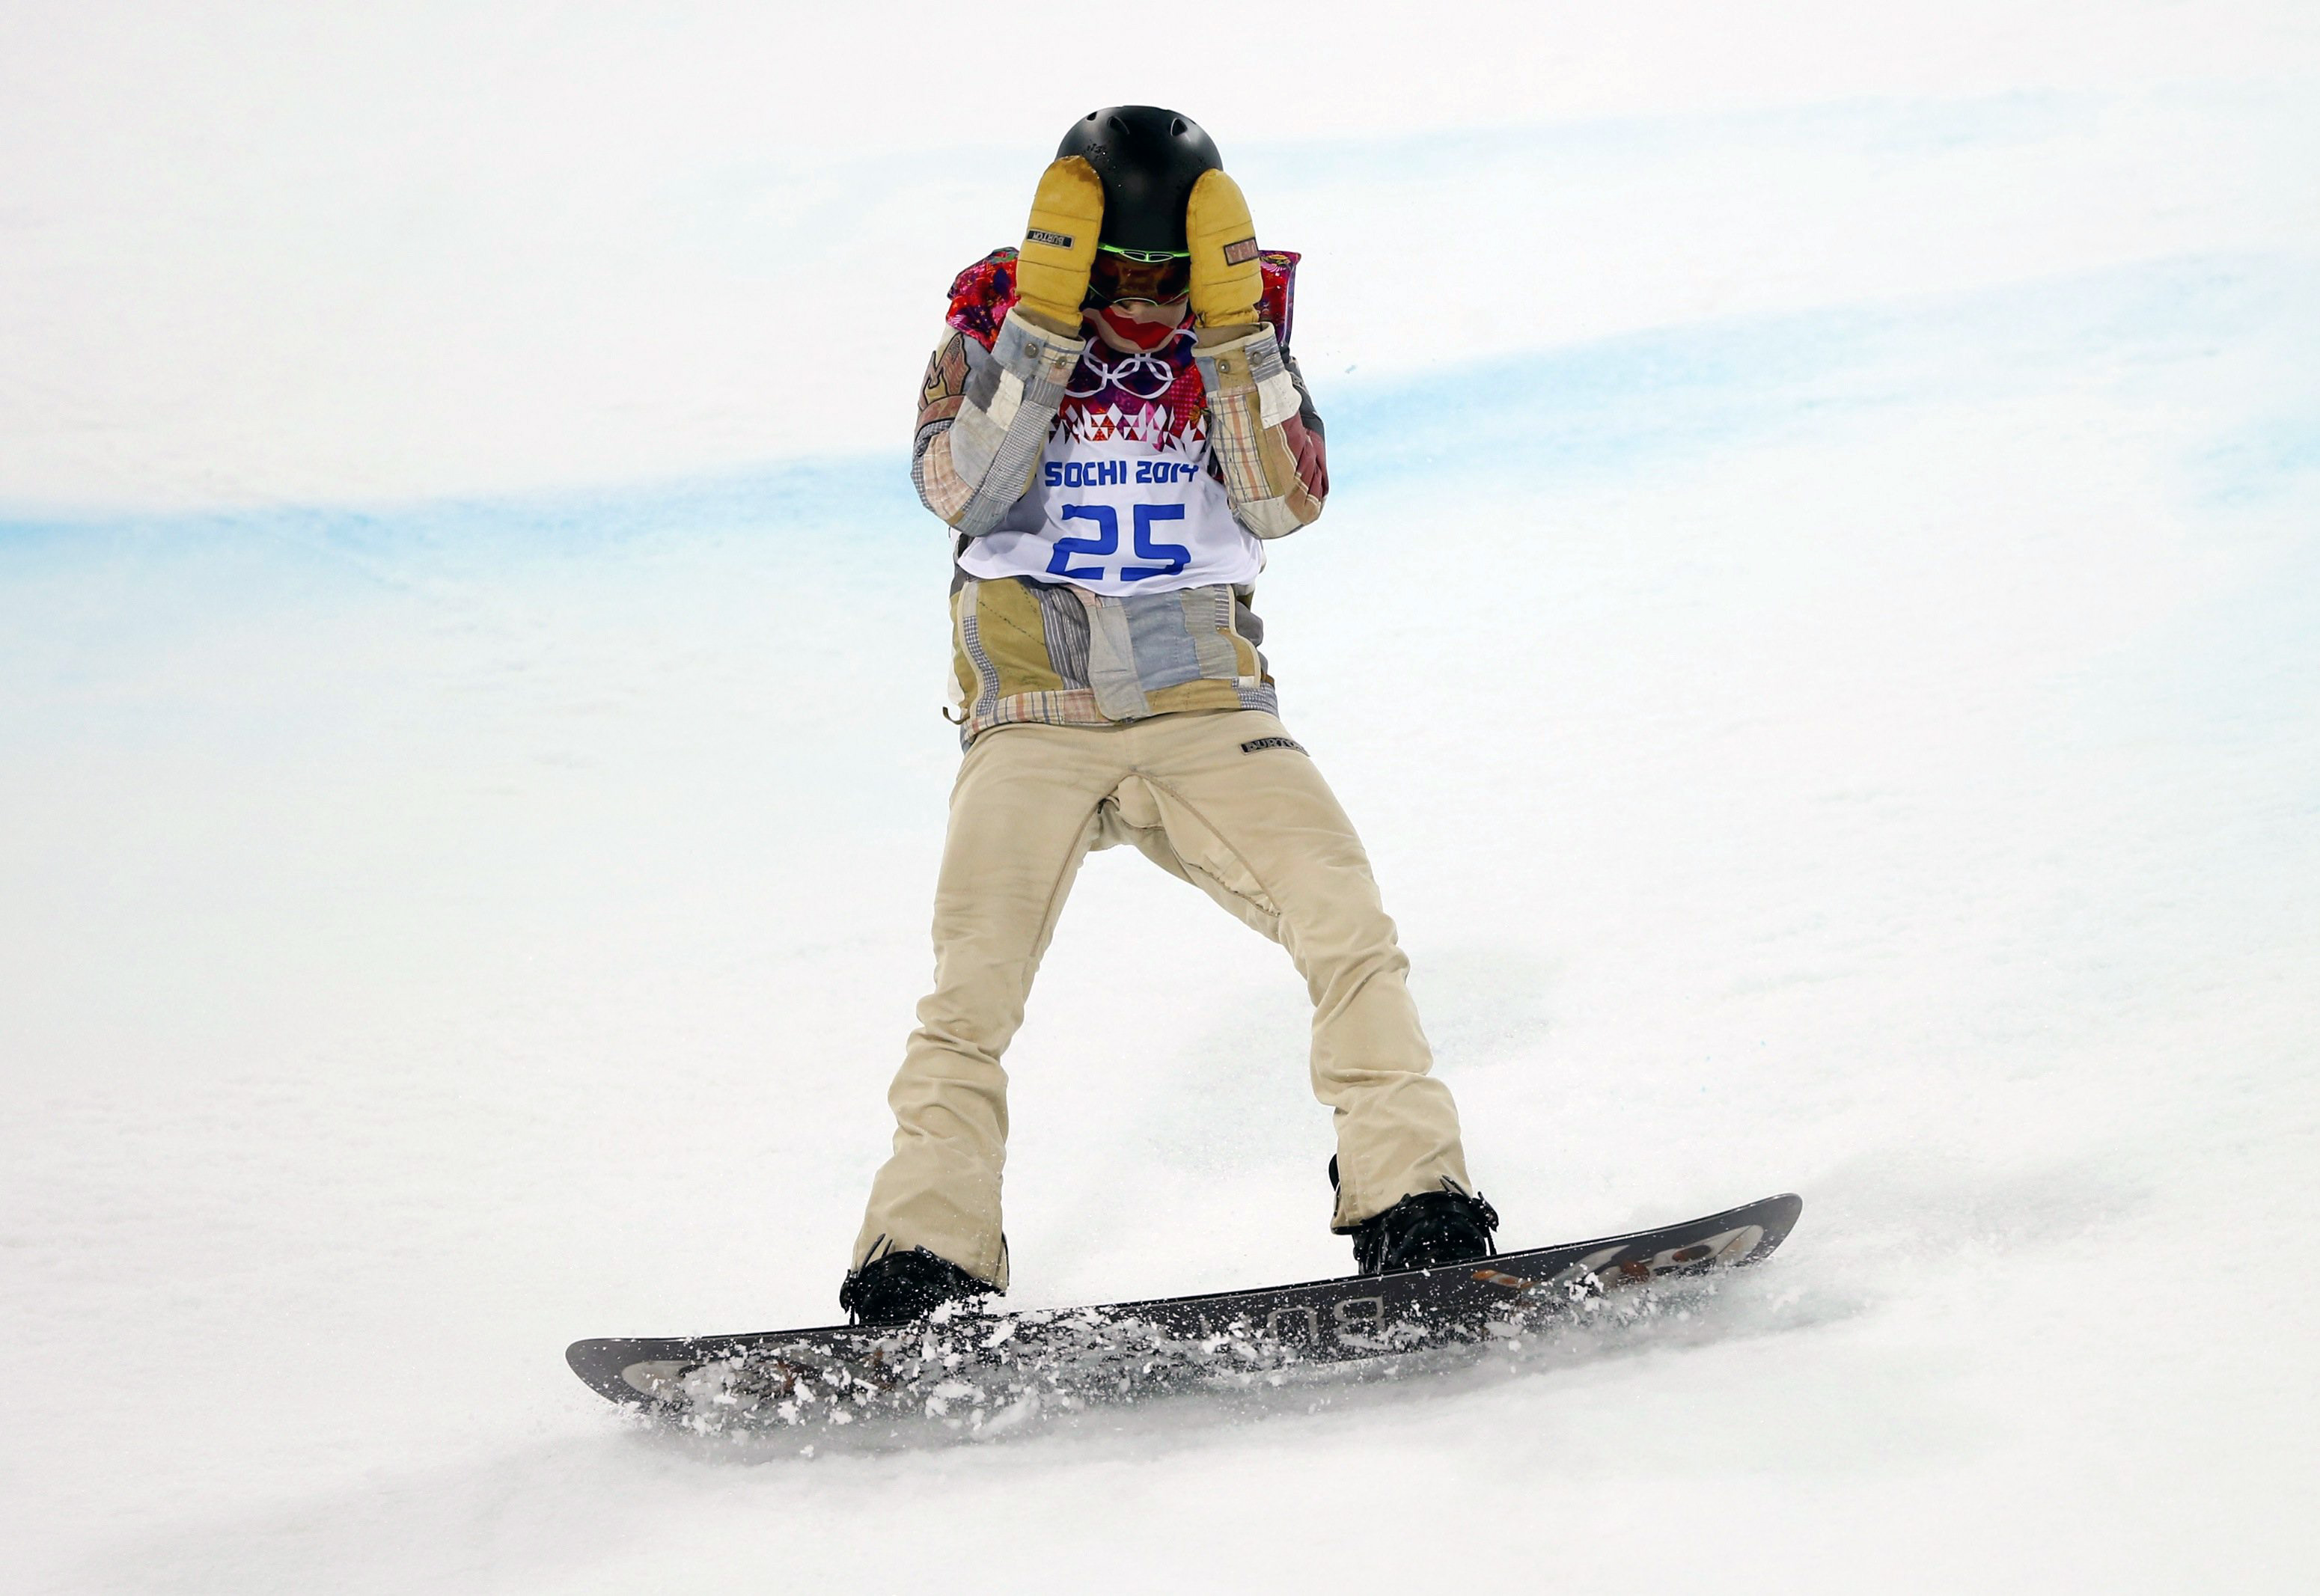 Shaun White Wins Gold In Halfpipe At The Winter Olympics